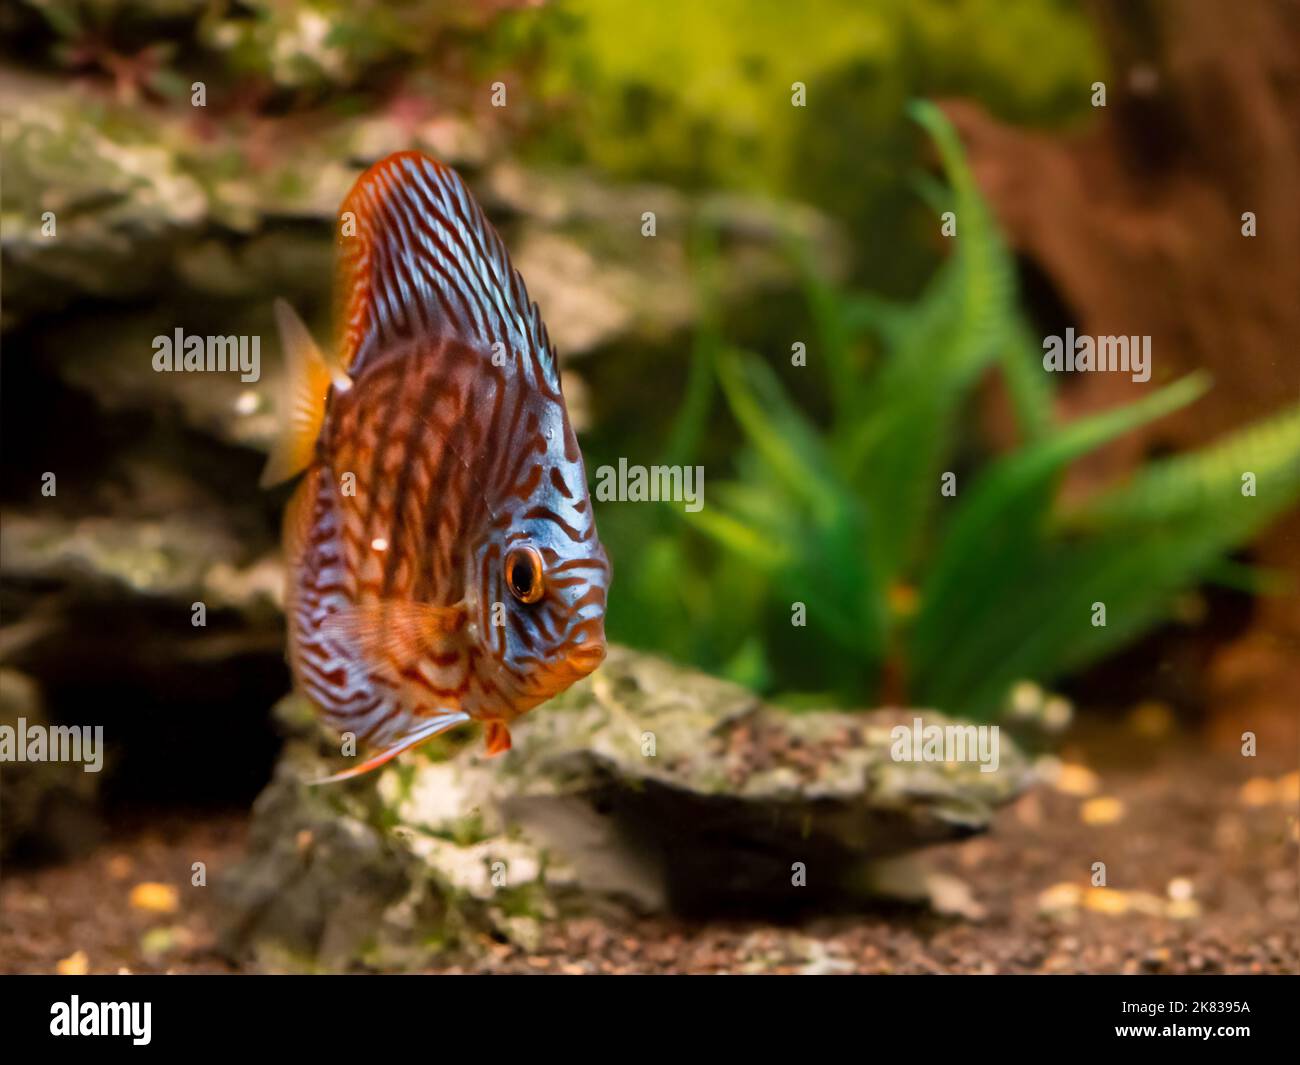 Floating Symphysodon discus in tank. Freshwater aquarium fish with shiny scales. Stock Photo